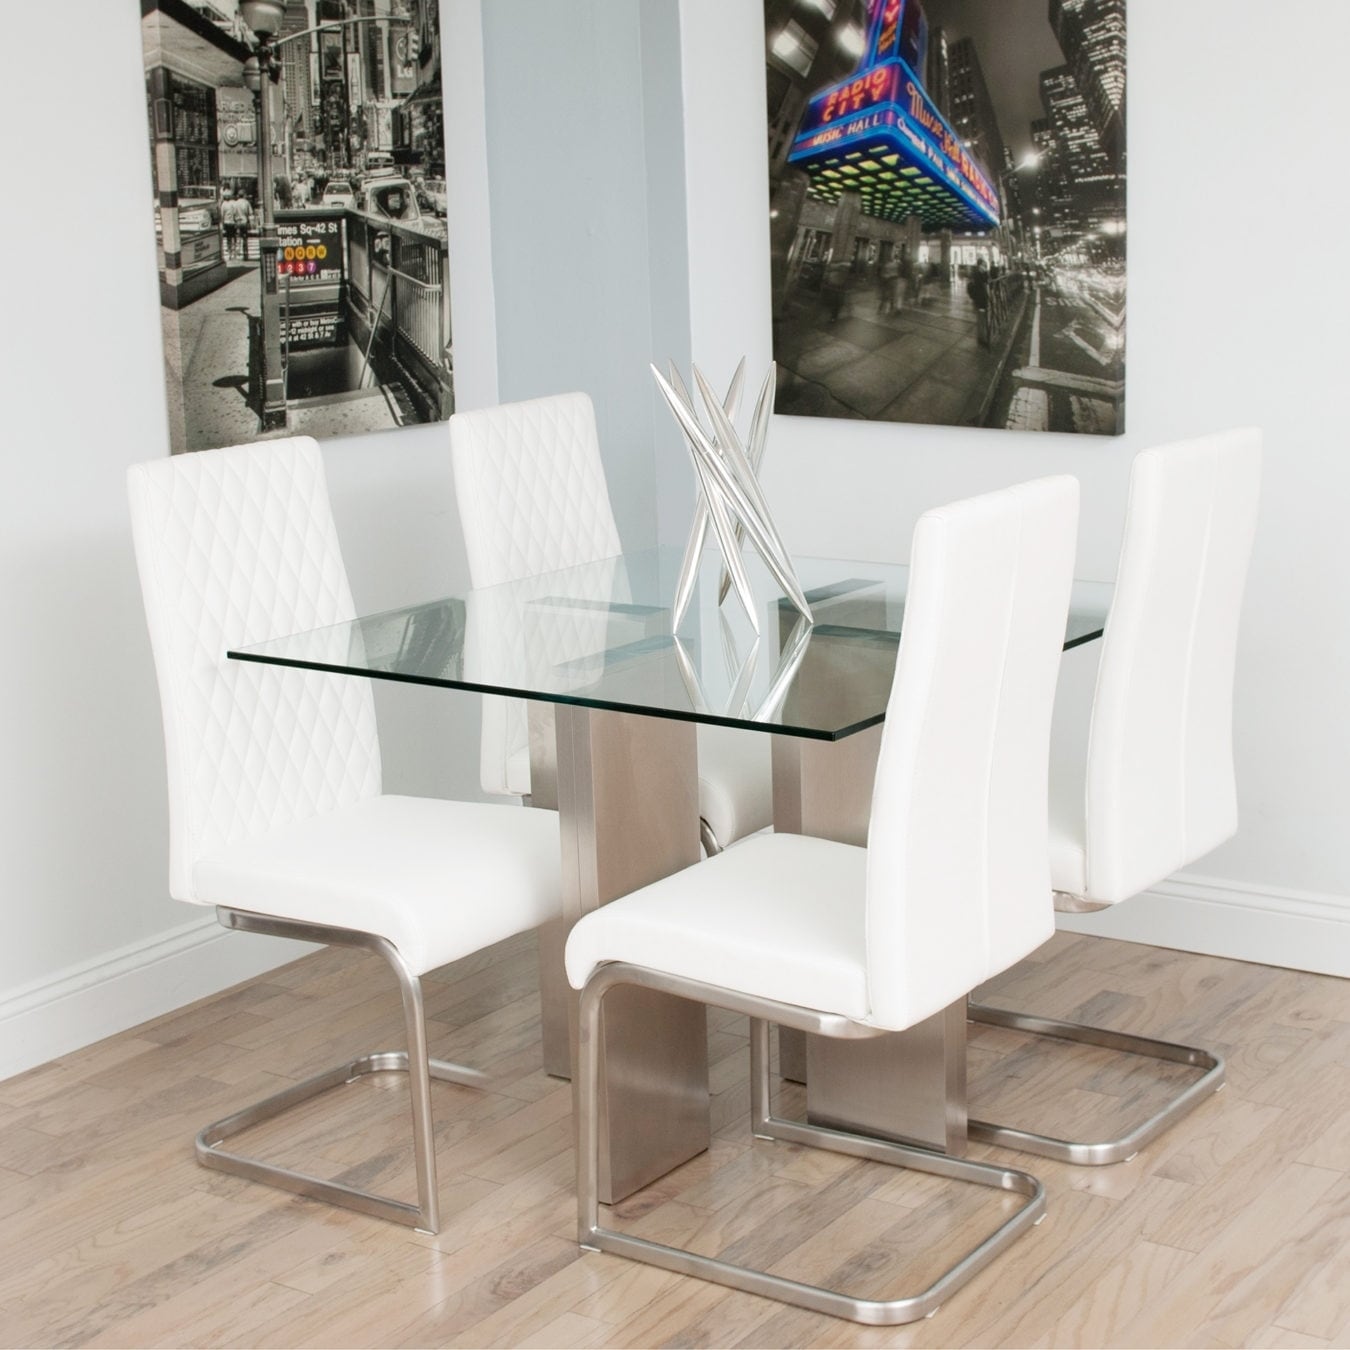 Soler Brushed Square Glass Dining Table